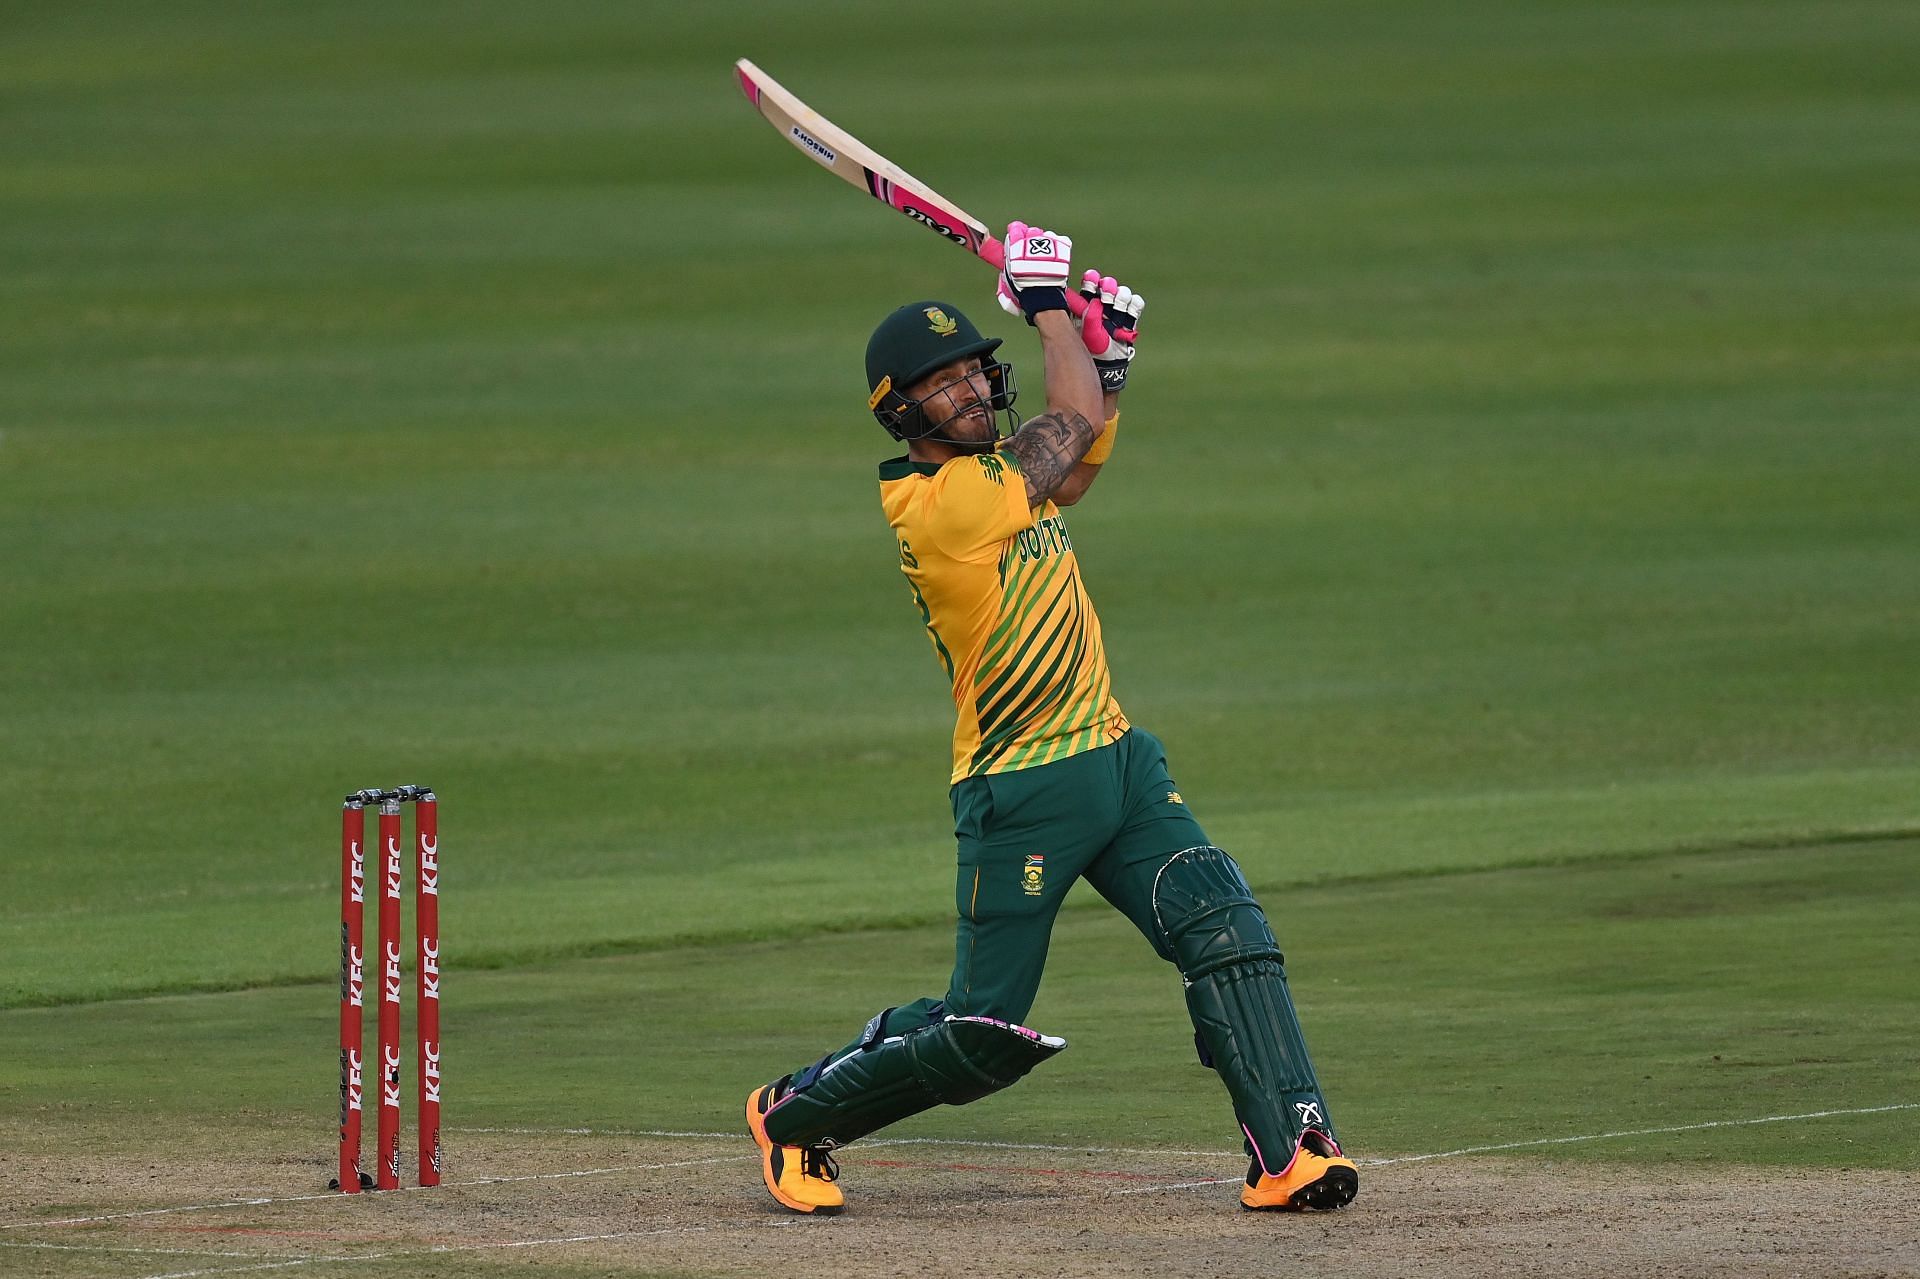 Faf du Plessis will be one of the highest foreign run-scorers in the IPL 2022 auction.